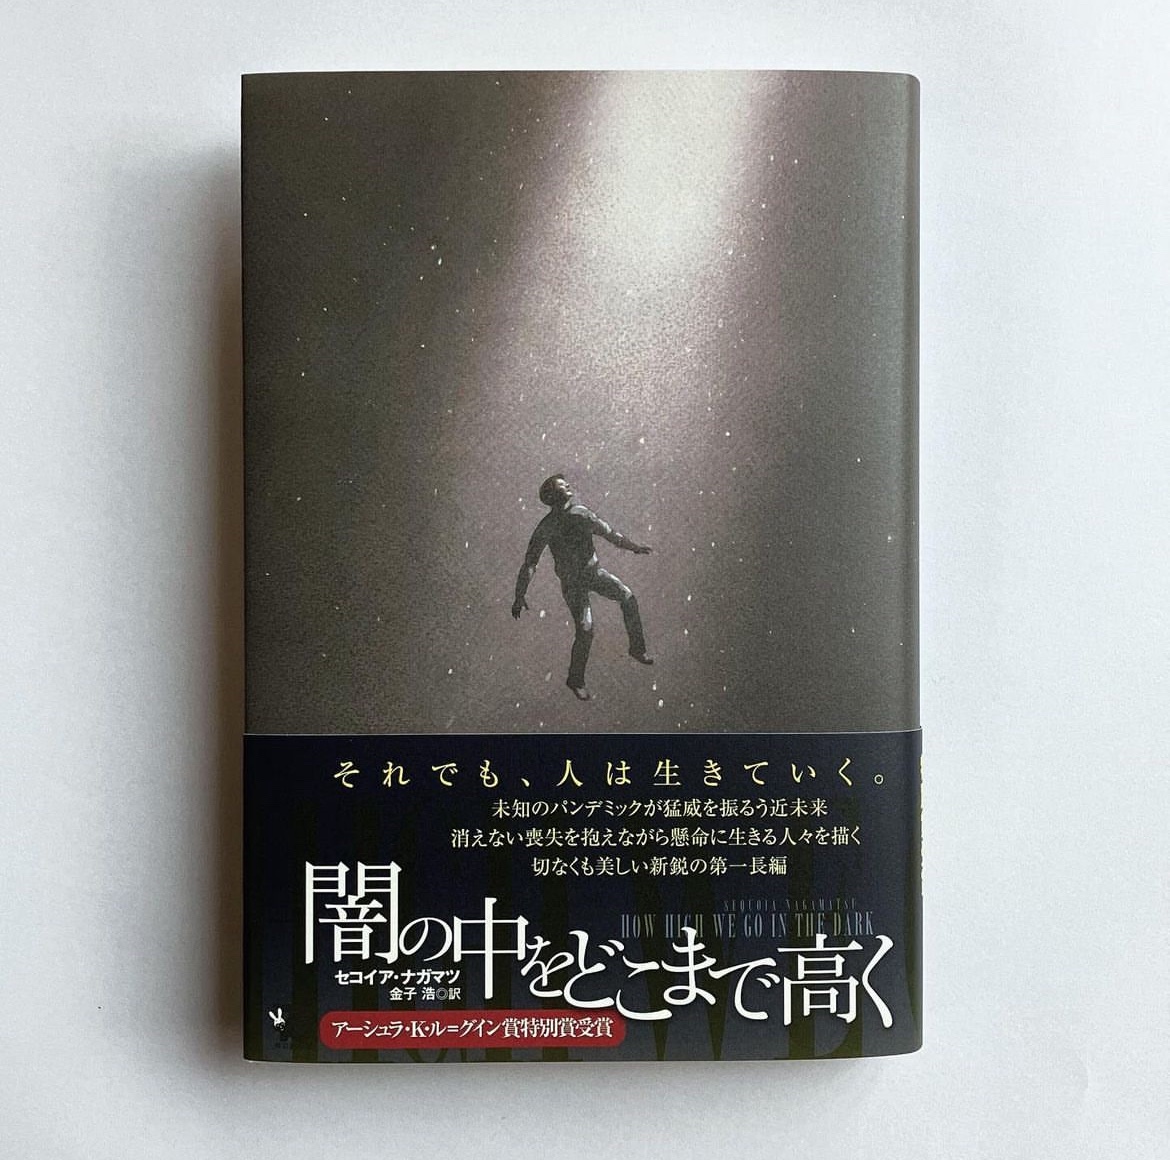 Looks like the Japanese version of How High We Go in the Dark is making its way out in the world.